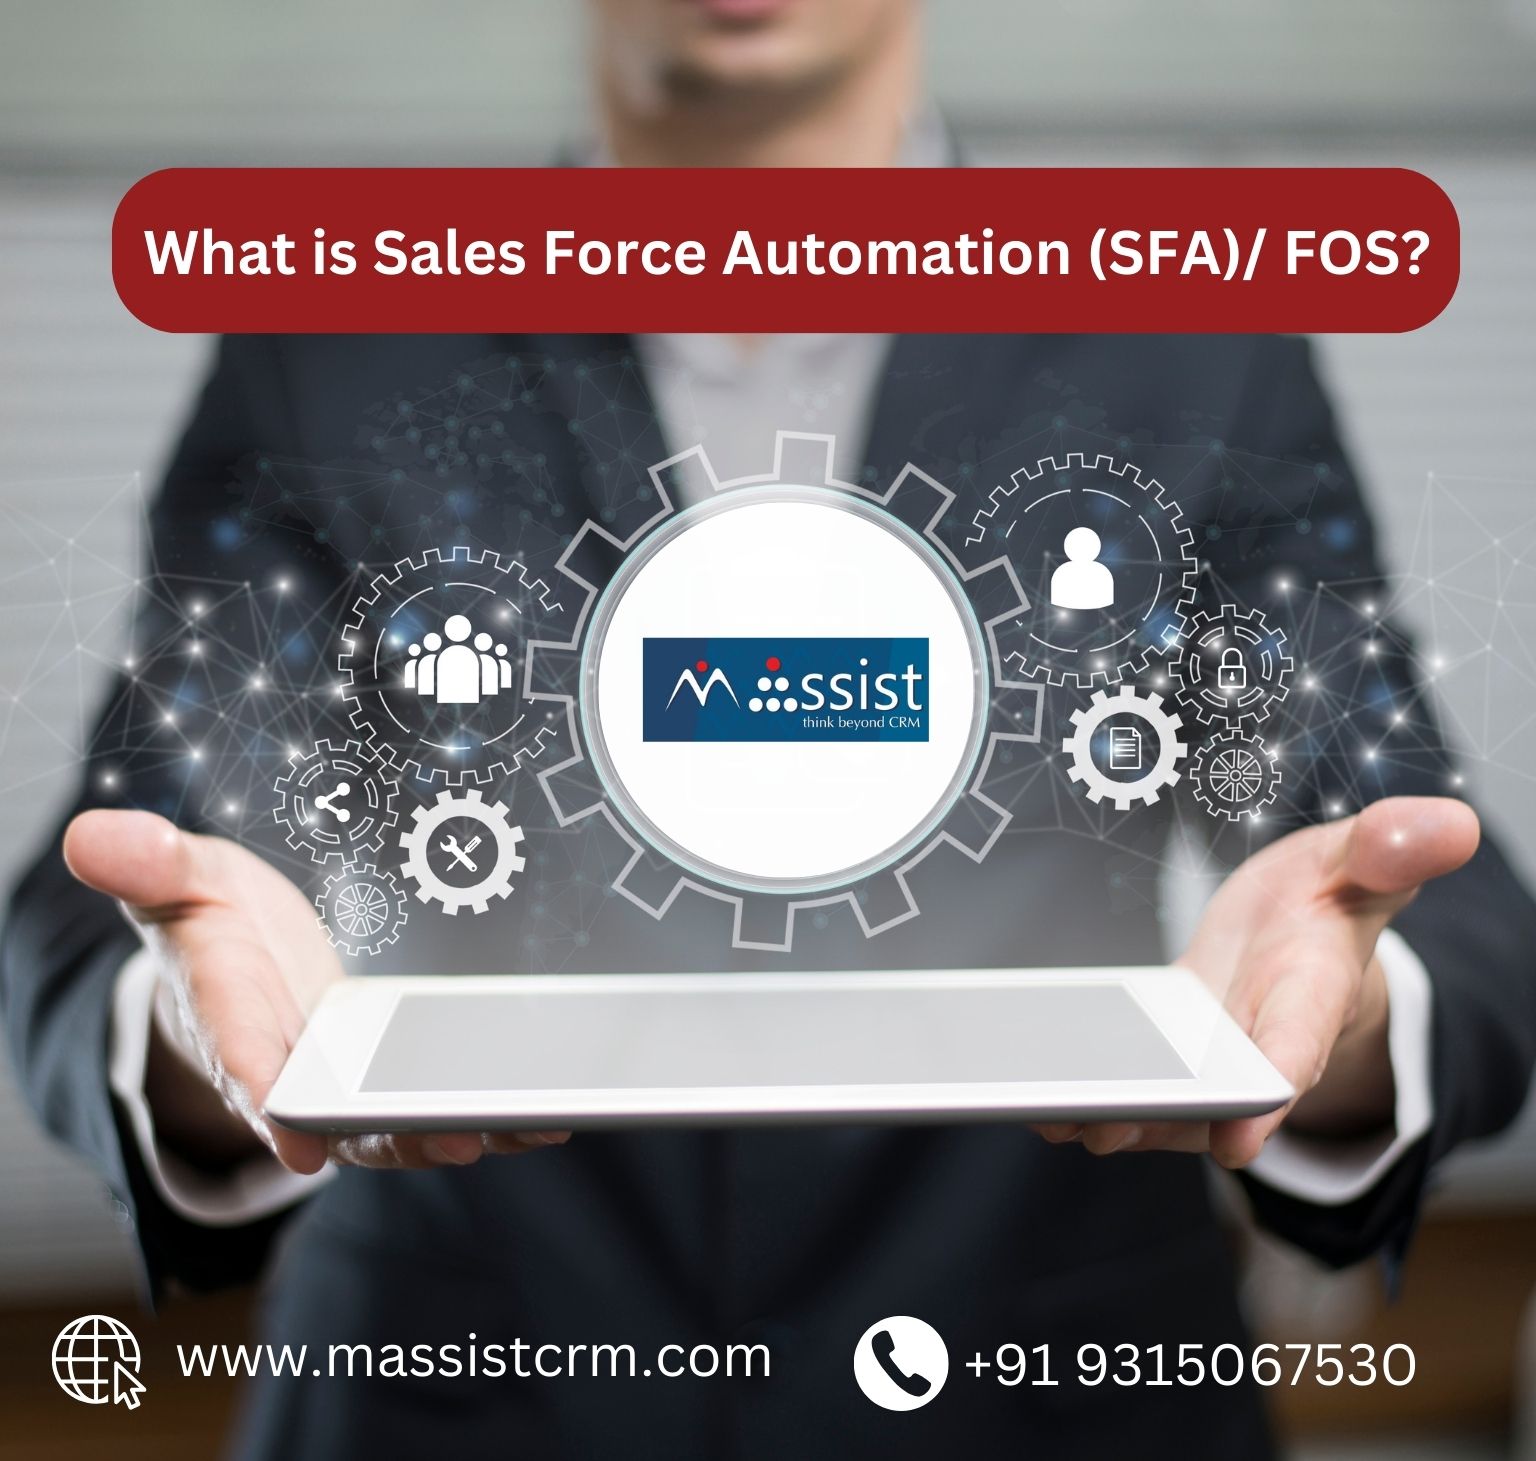 What is Sales Force Automation (SFA)/ FOS?